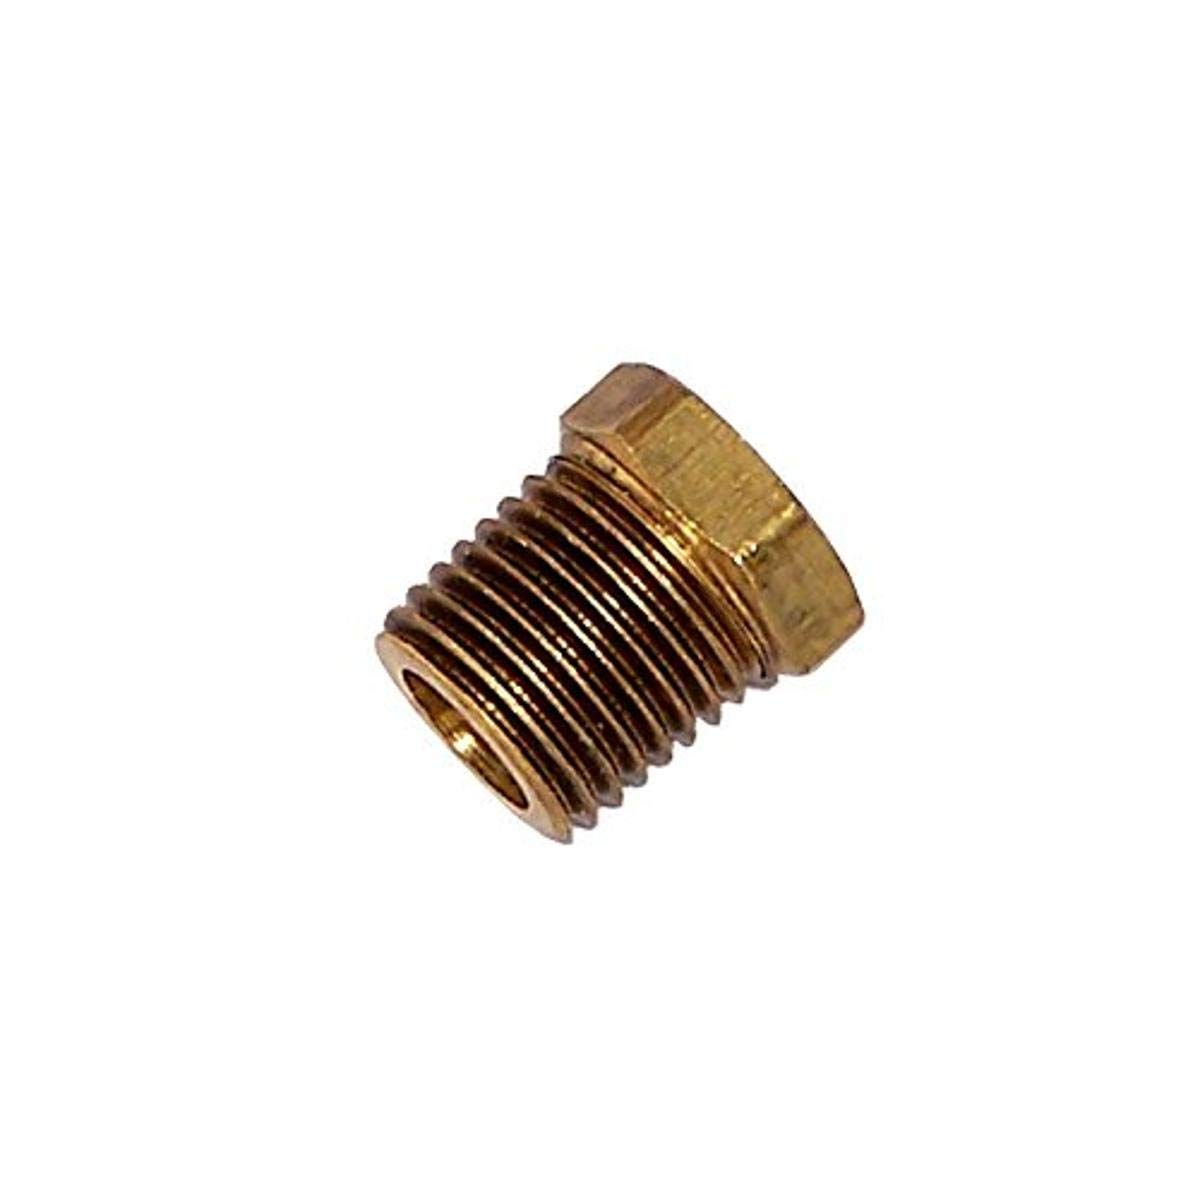 1/4IN F NPT COMPRESSION FITTING FOR 1/4IN O.D. TUBE